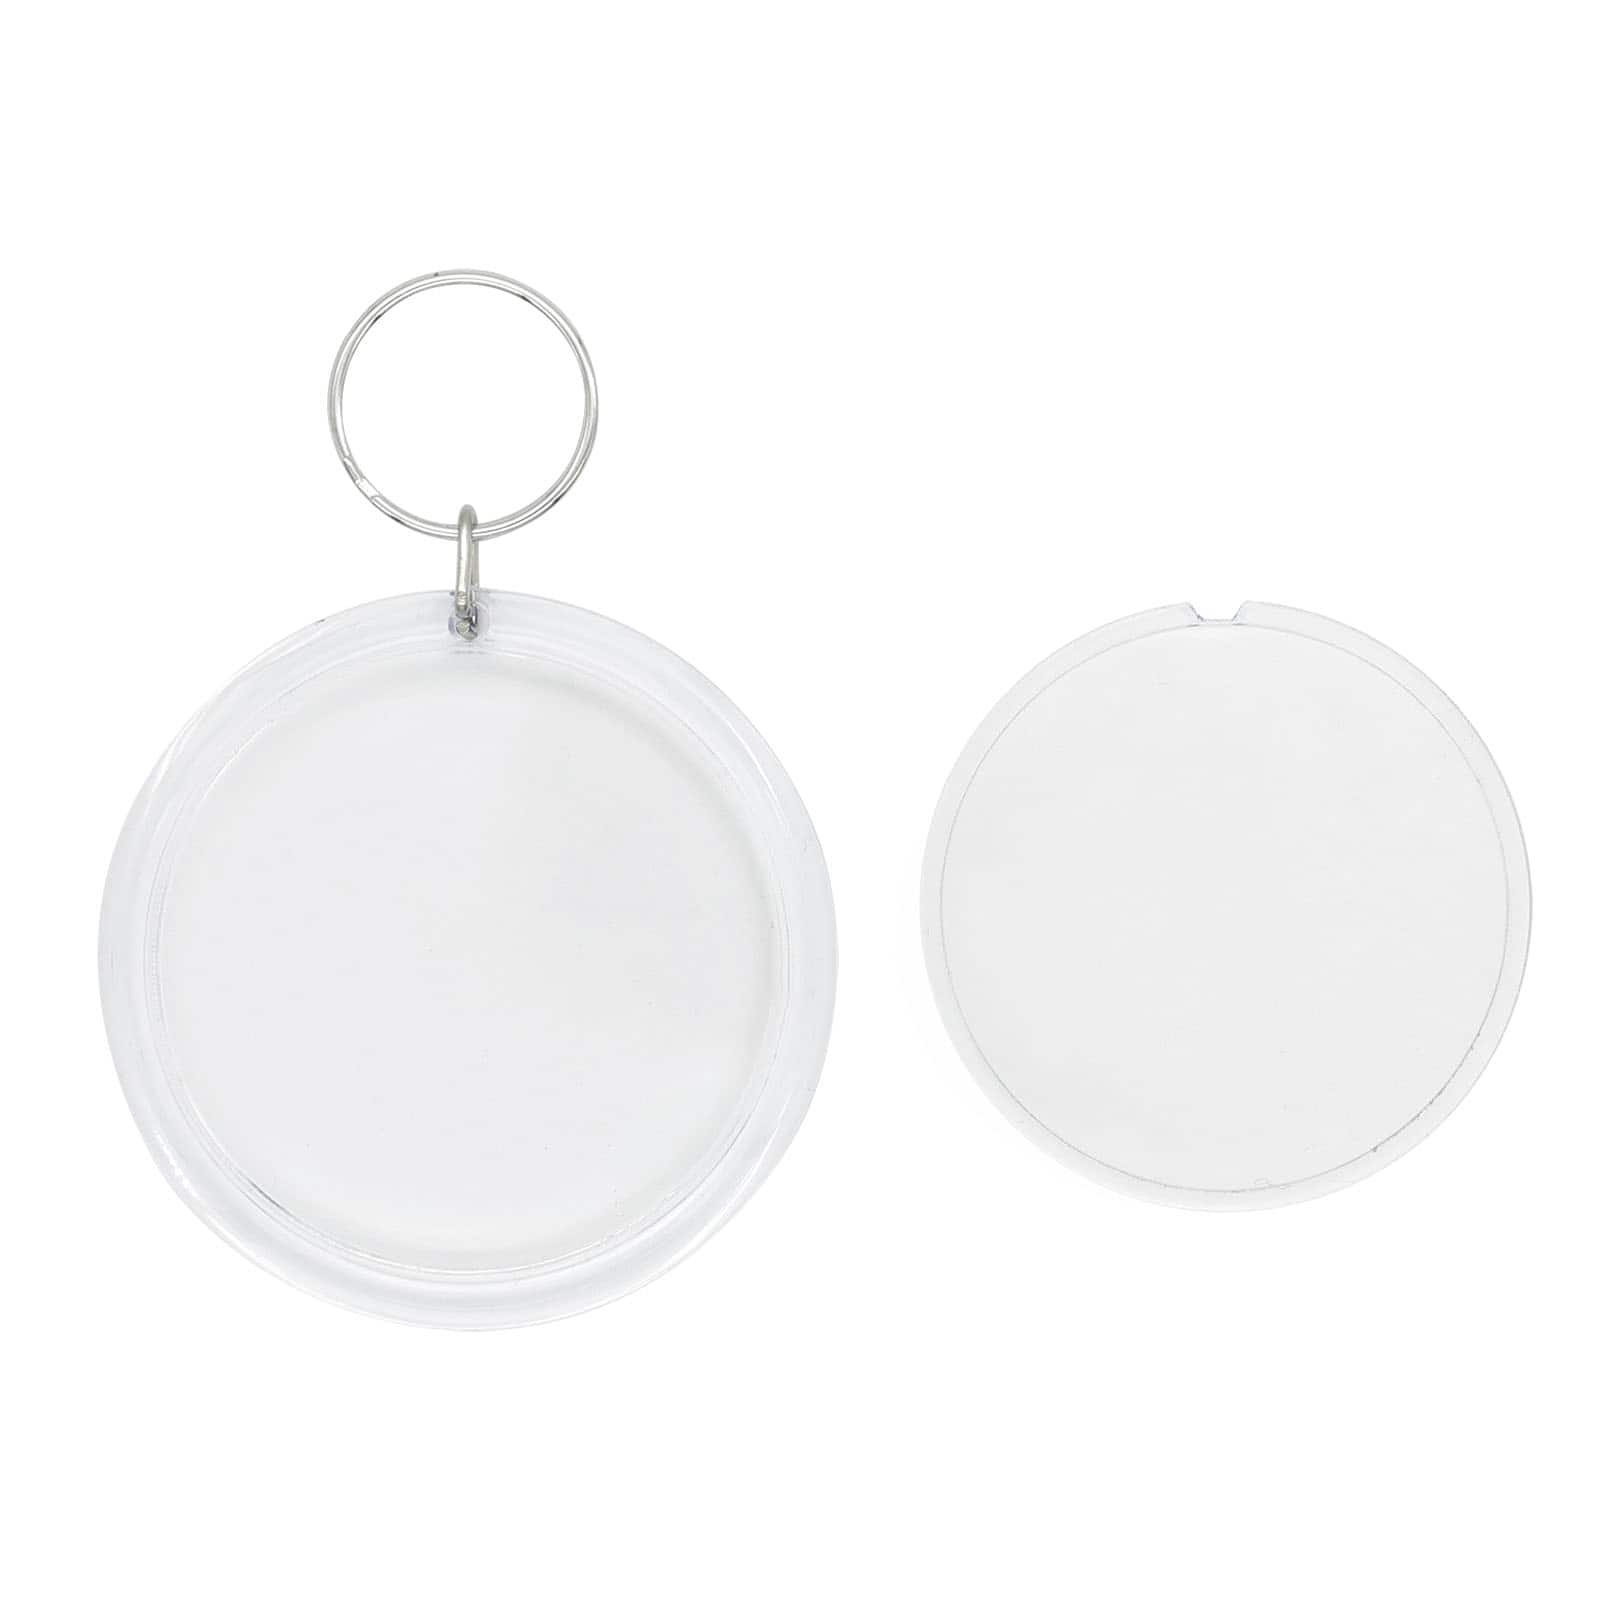 Bright Creations 20 Pieces Blank Clear Acrylic Keychains, Transparent Circle Dics 4 inch Diameter Round Keychains for DIY Craft Projects, Adult Unisex